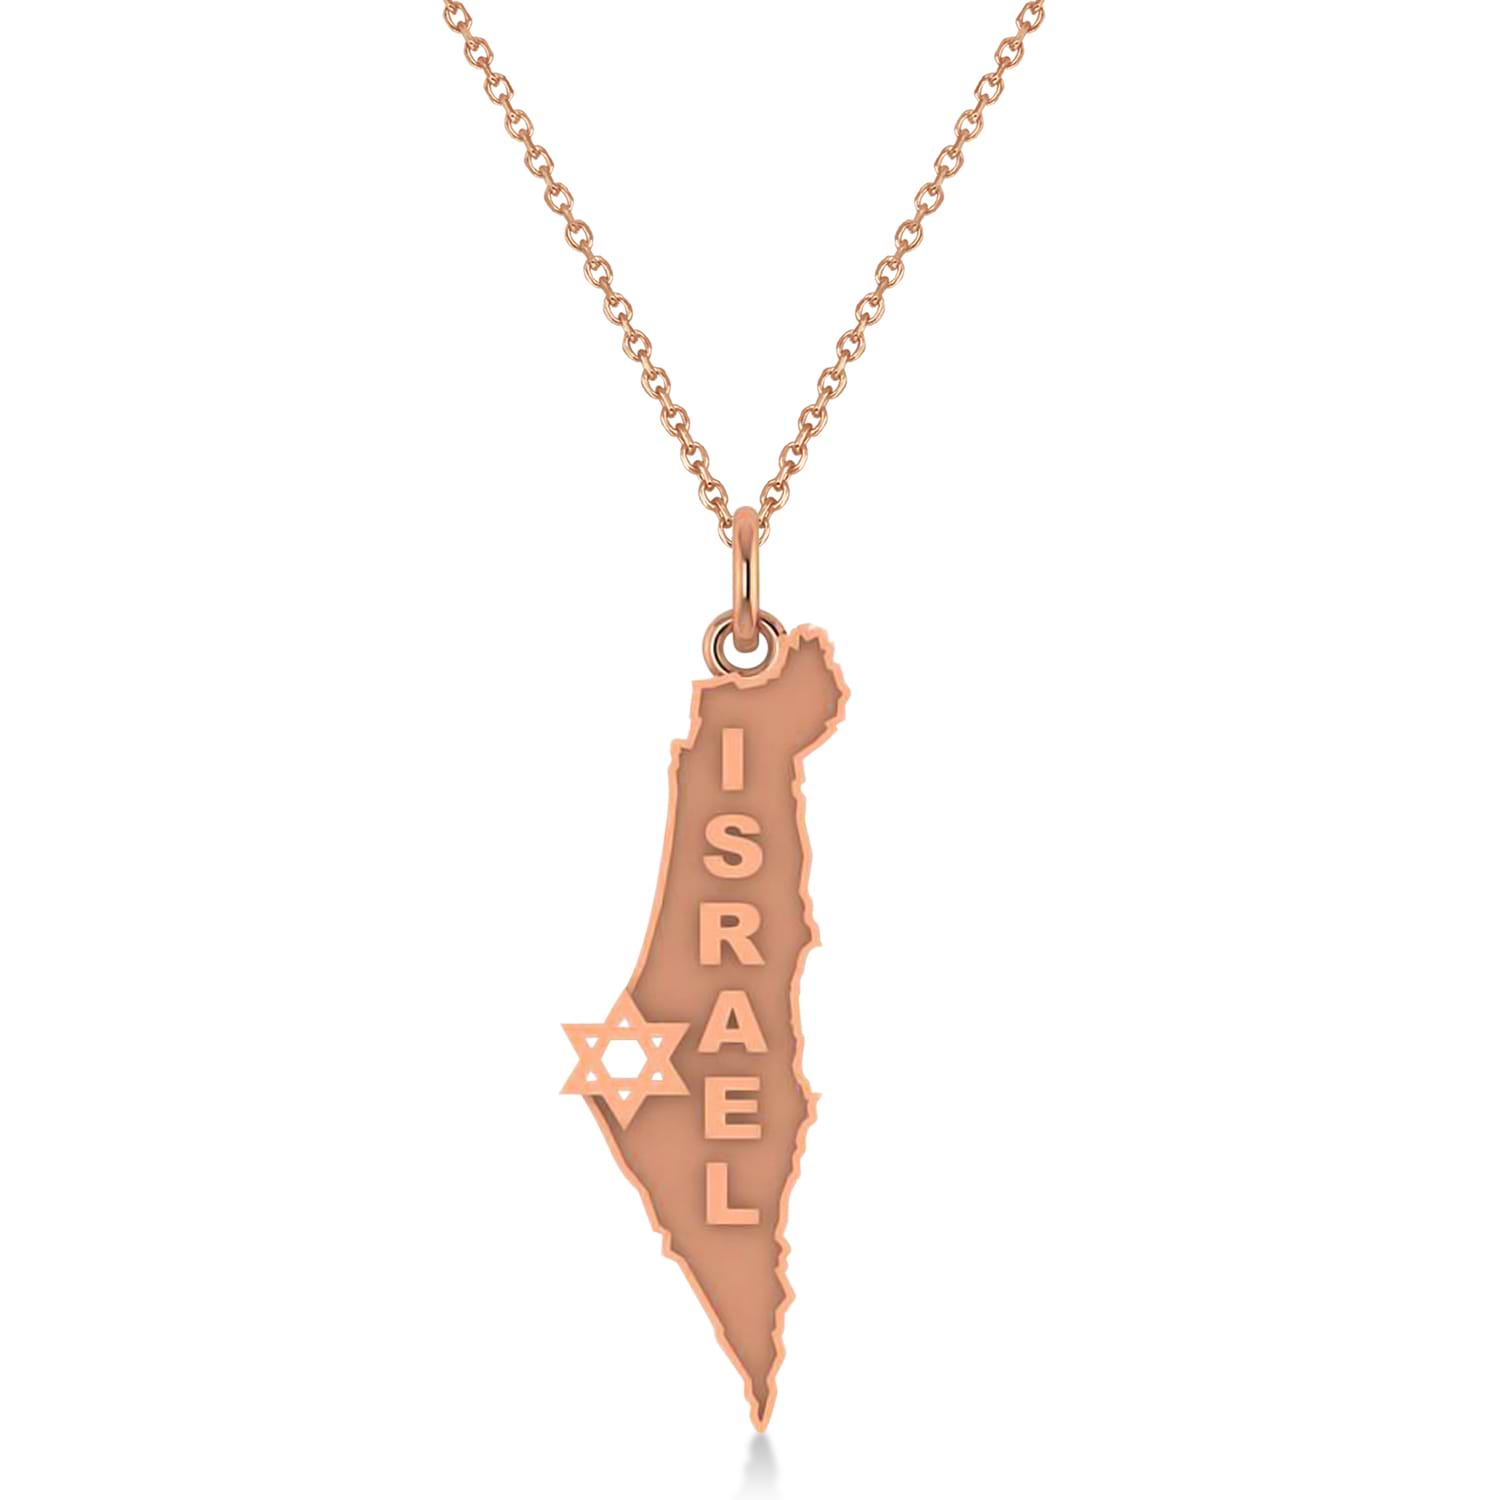 Israel Map Pendant Necklace with Jewish Star 14K Rose Gold